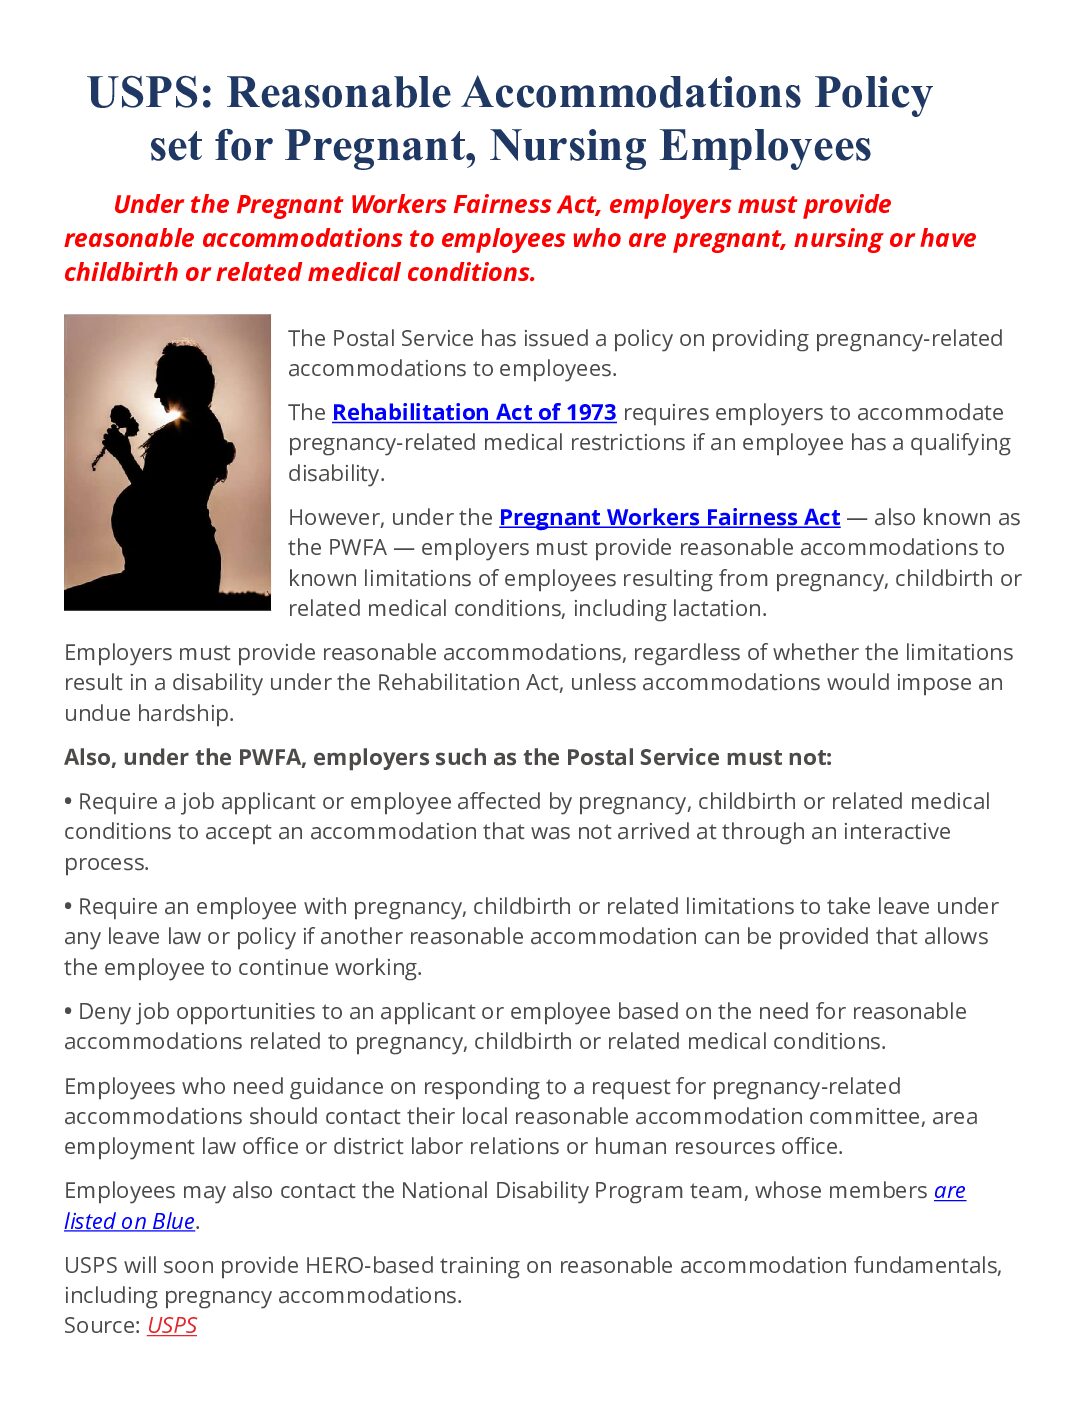 USPS: Reasonable Accommodations Policy set for Pregnant, Nursing Employees - 